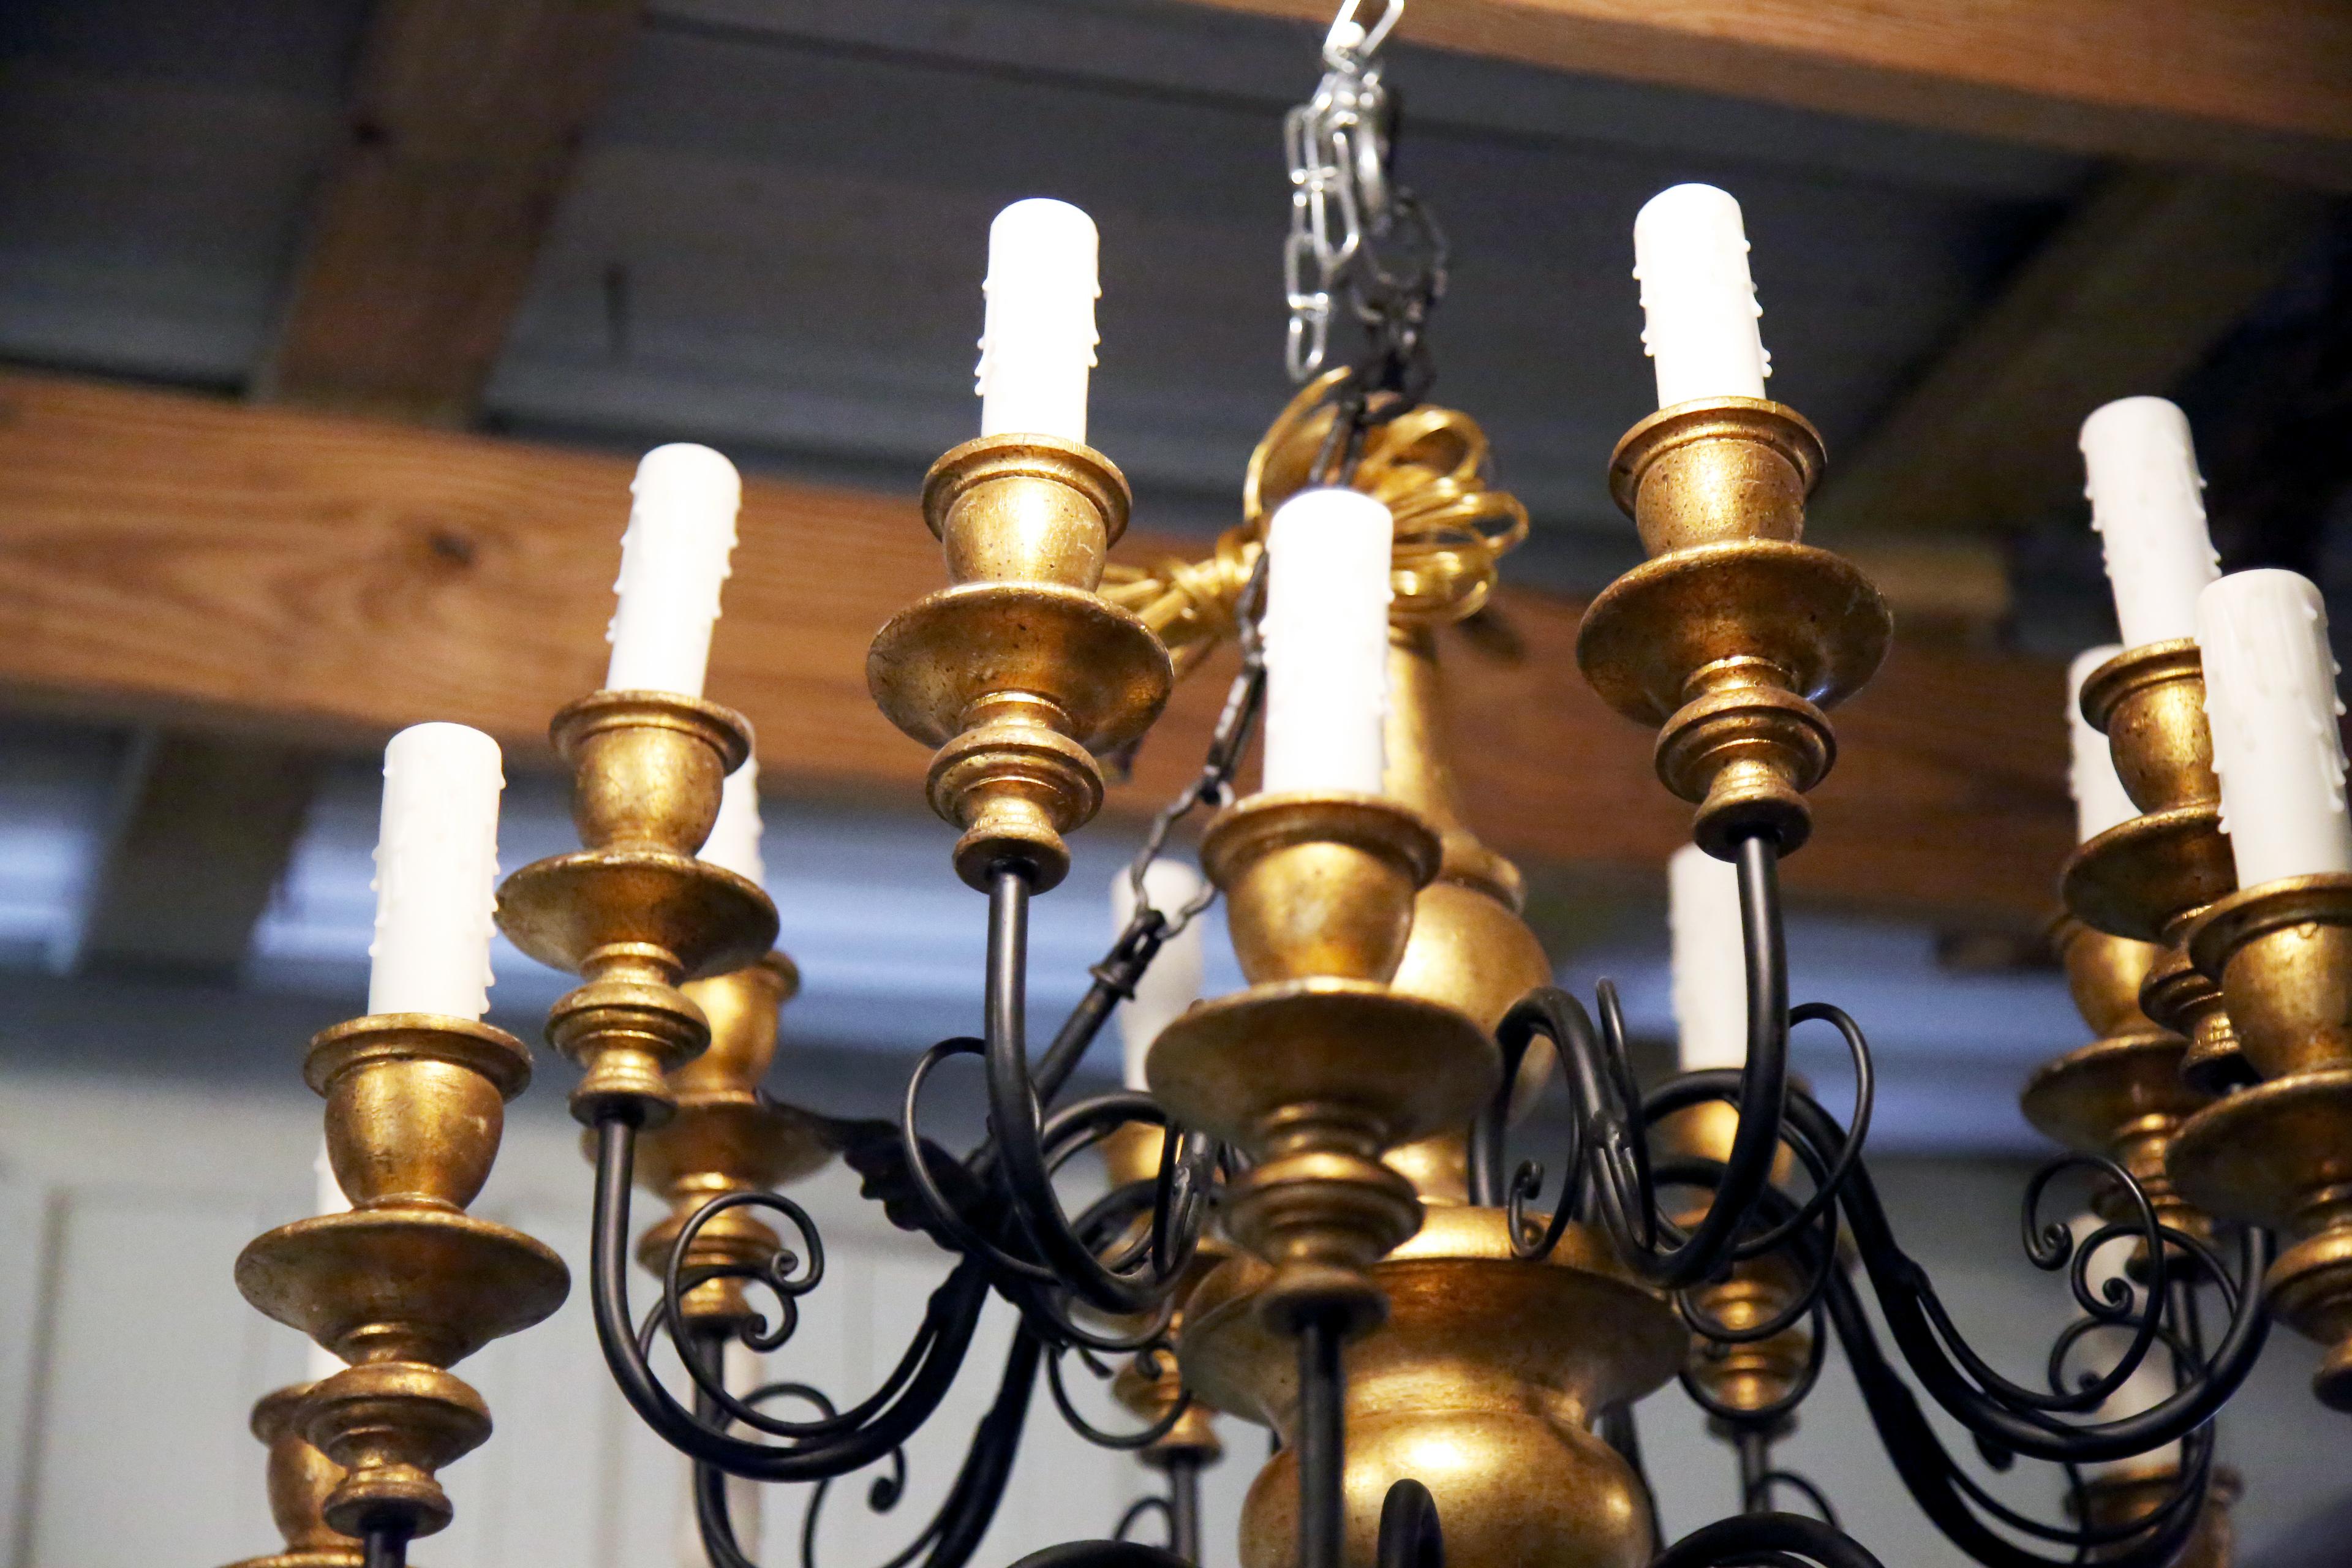 Beautiful 16 arm Italian chandelier in gold gilt with black painted iron arms. Absolutely gorgeous and is a show stopper. This is a unique chandelier that can go in many different design spaces. Rewired for the US and has had a plug added at the end